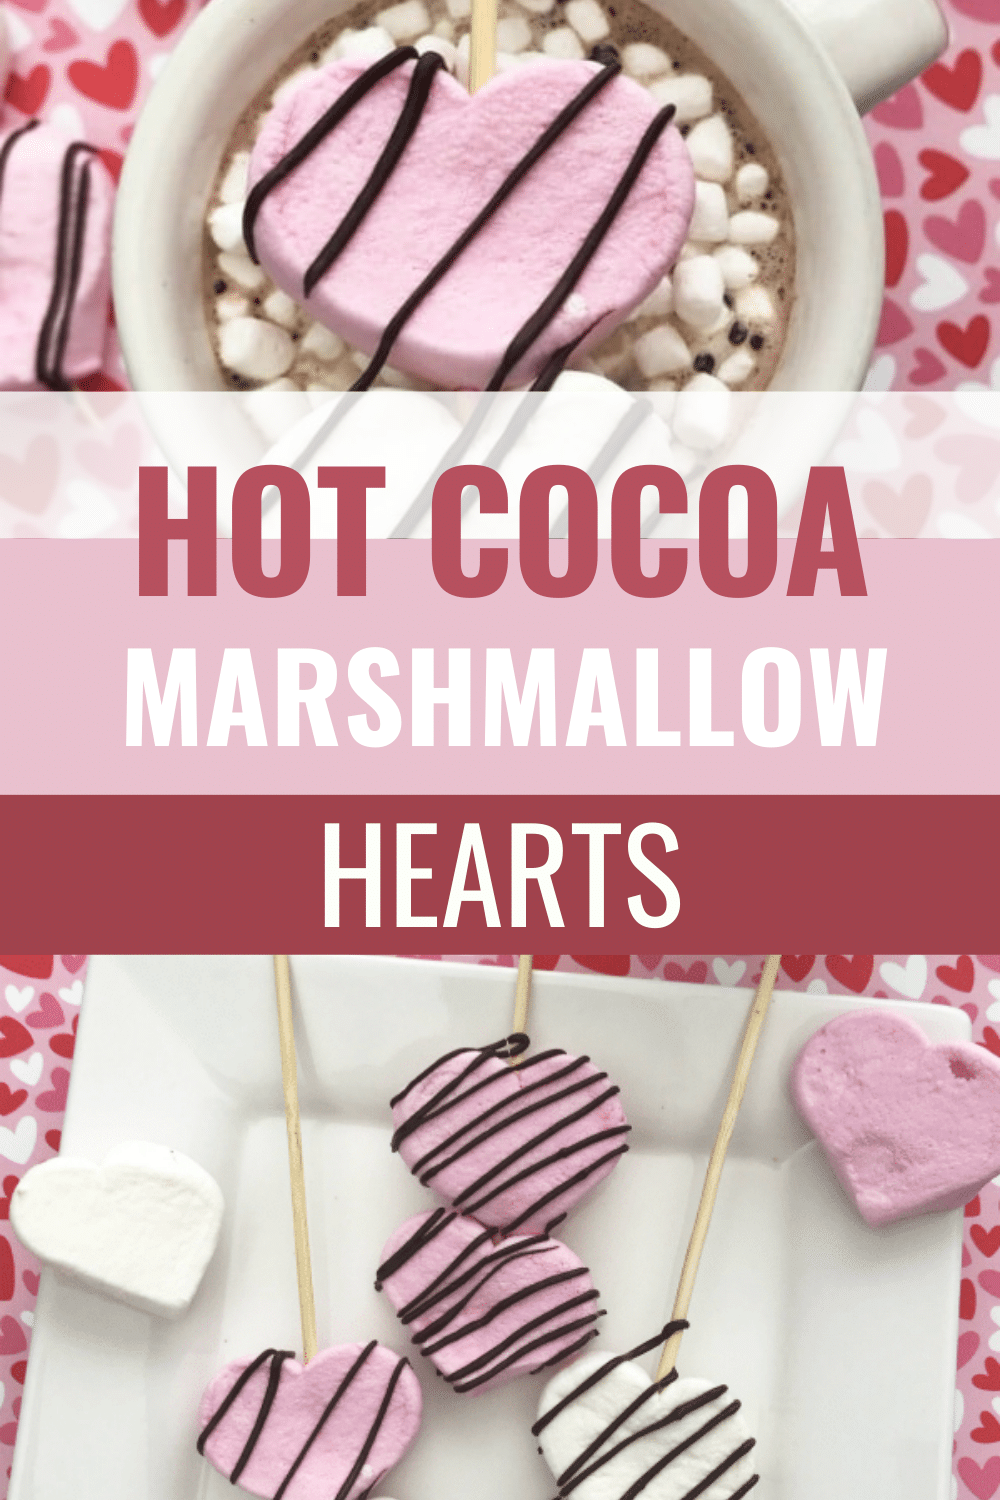 Valentine Hot Cocoa Marshmallow Hearts are a delicious way to dress up a mug of hot chocolate. These chocolate drizzled marshmallow hearts are easy to make. A perfect treat for Valentine's Day. #valentinesday #treats #marshmallows via @wondermomwannab